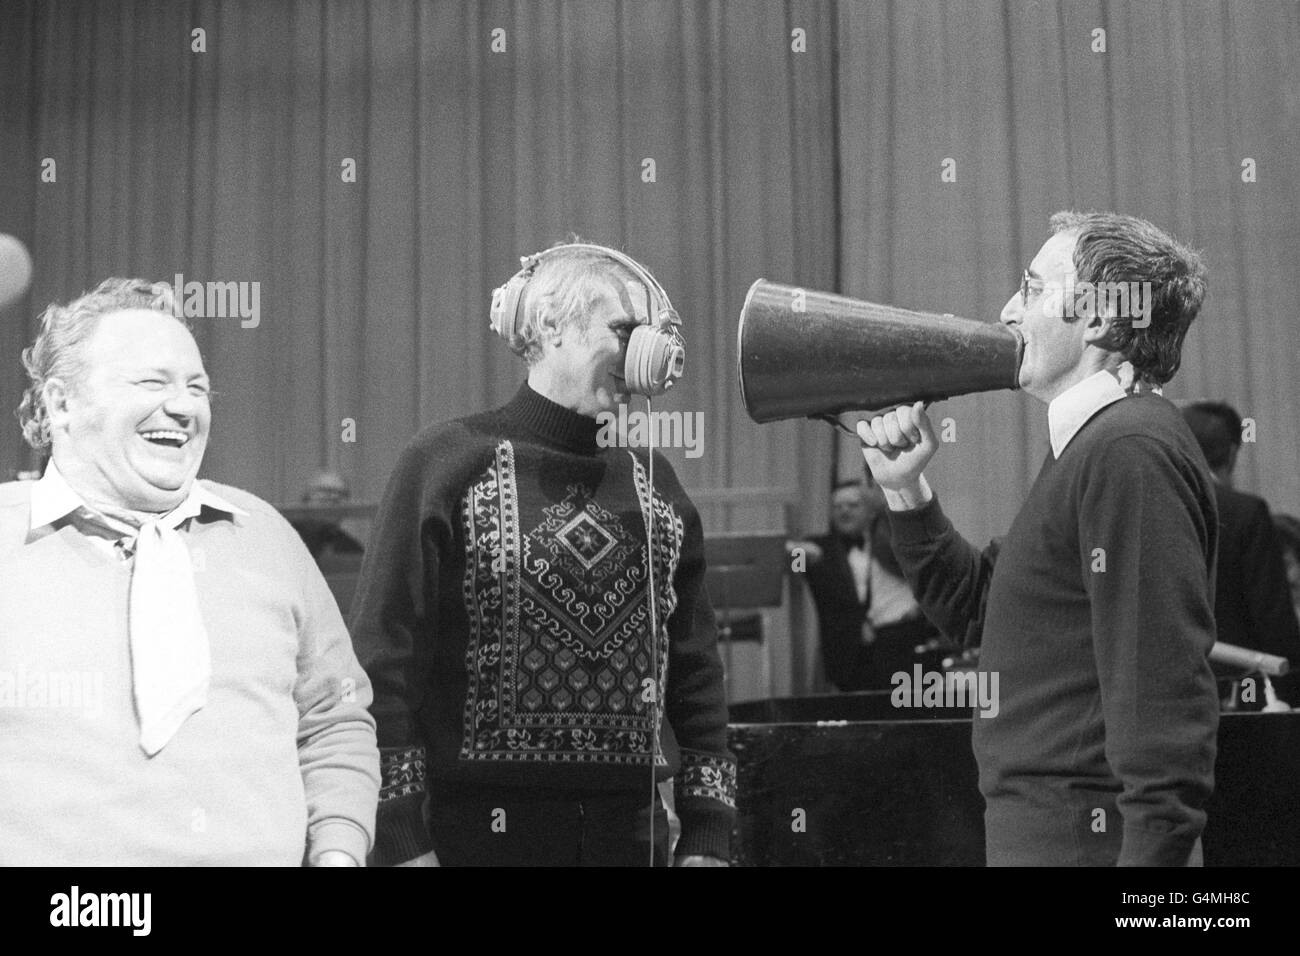 (L-R) Harry Secombe, Spike Milligan and Peter Sellers, the original Goons, back together again for the first time in 12 years at the Camden Theatre, rehearsing for the BBC's 50th anniversary celebrations. 27/02/02: Spike Milligan died early today at his home in Sussex, his agent said. Stock Photo